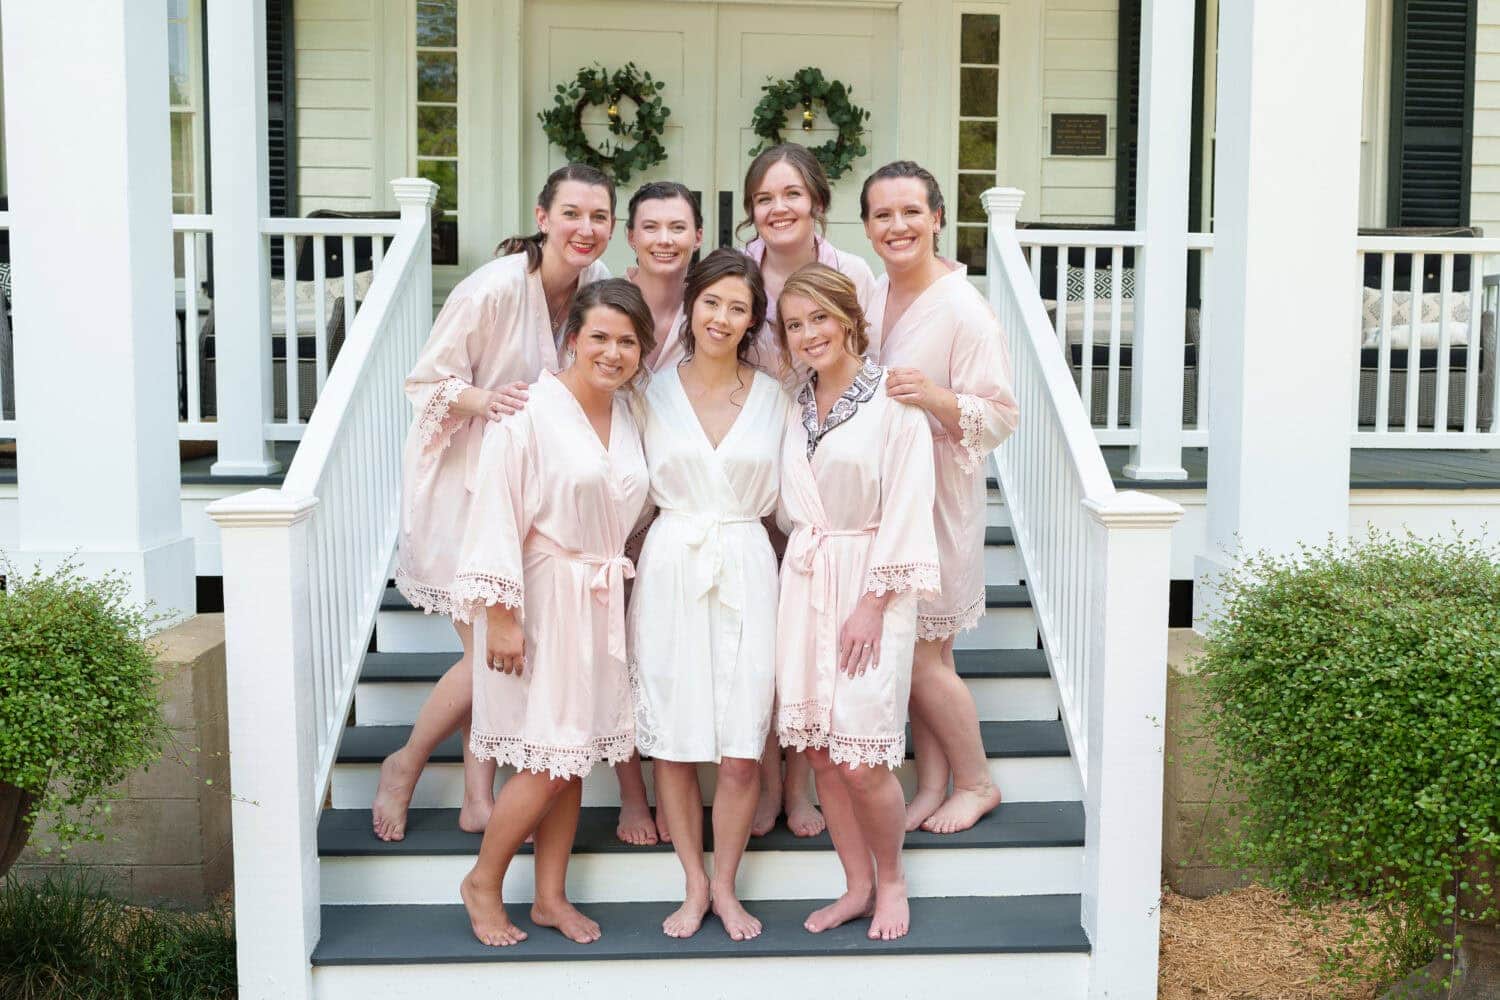 Bridesmaids in robes on the front porch - Tanglewood Plantation